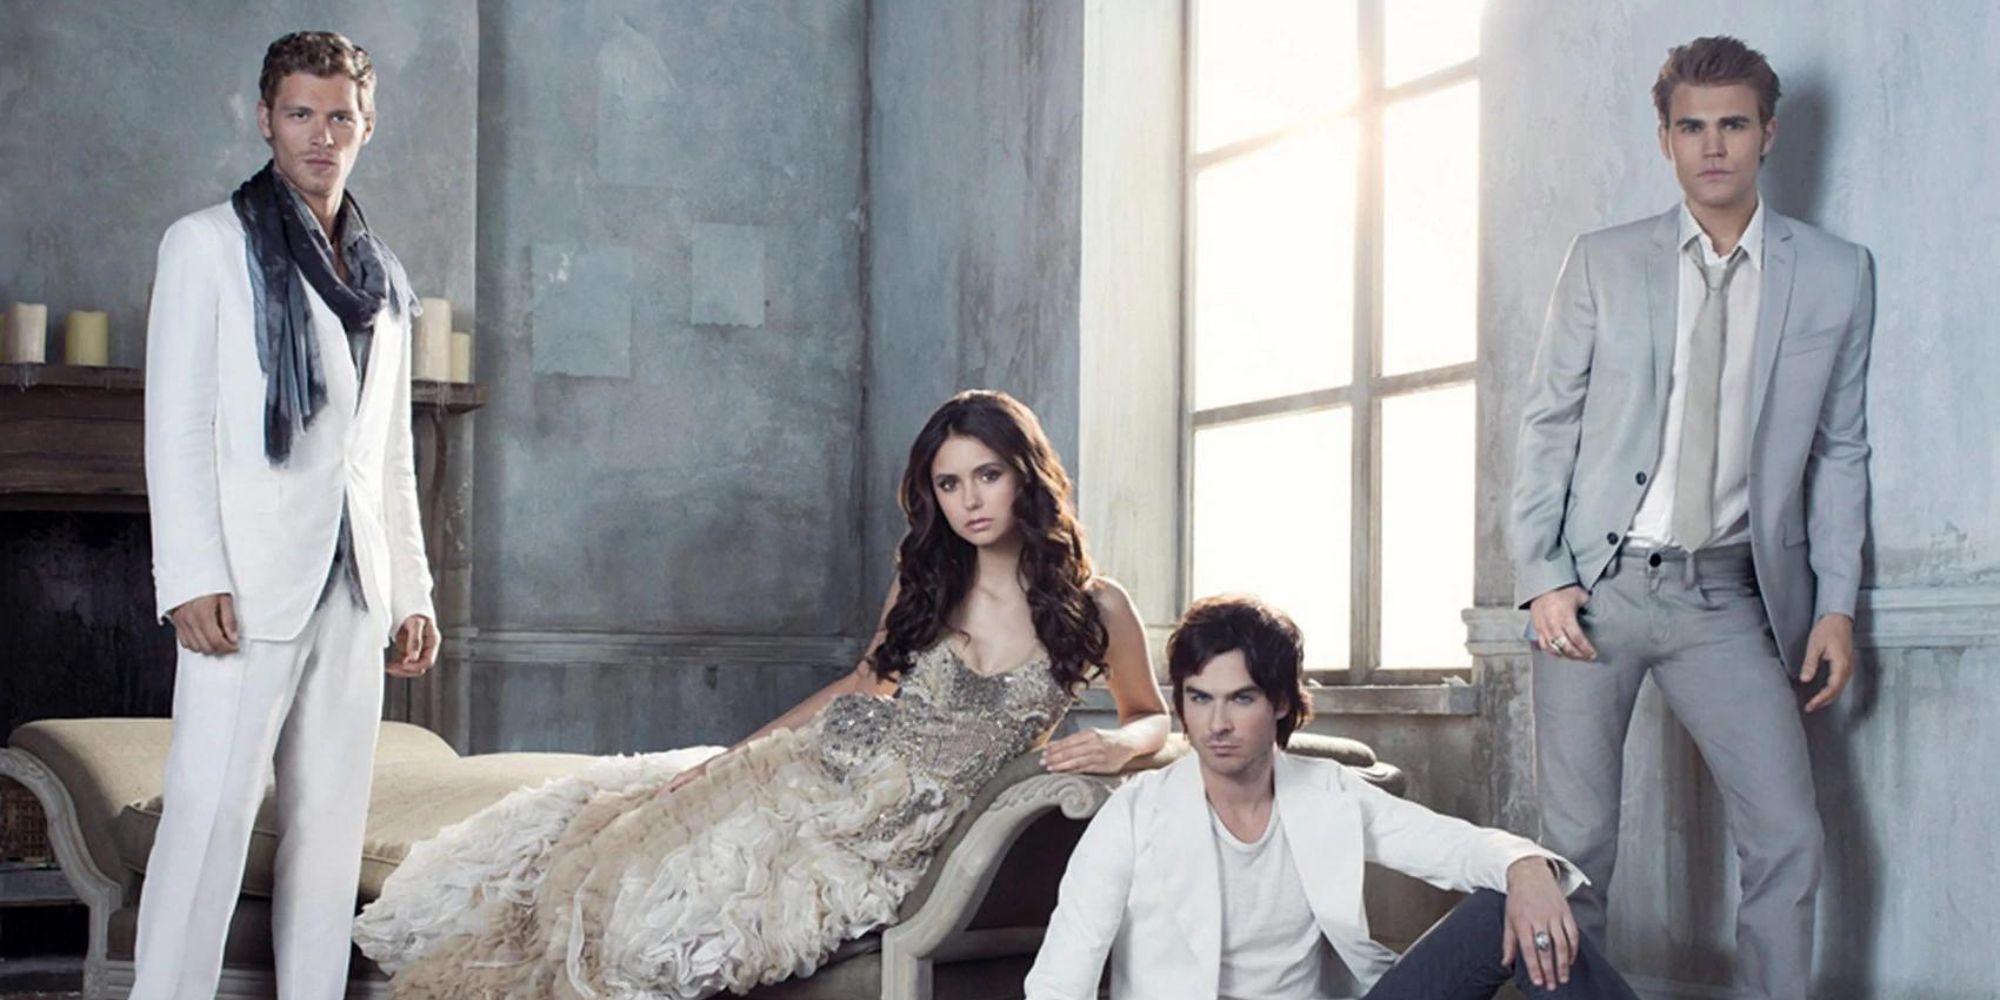 Klaus, Elena, Damon and Stefan from The Vampire Diaries posing